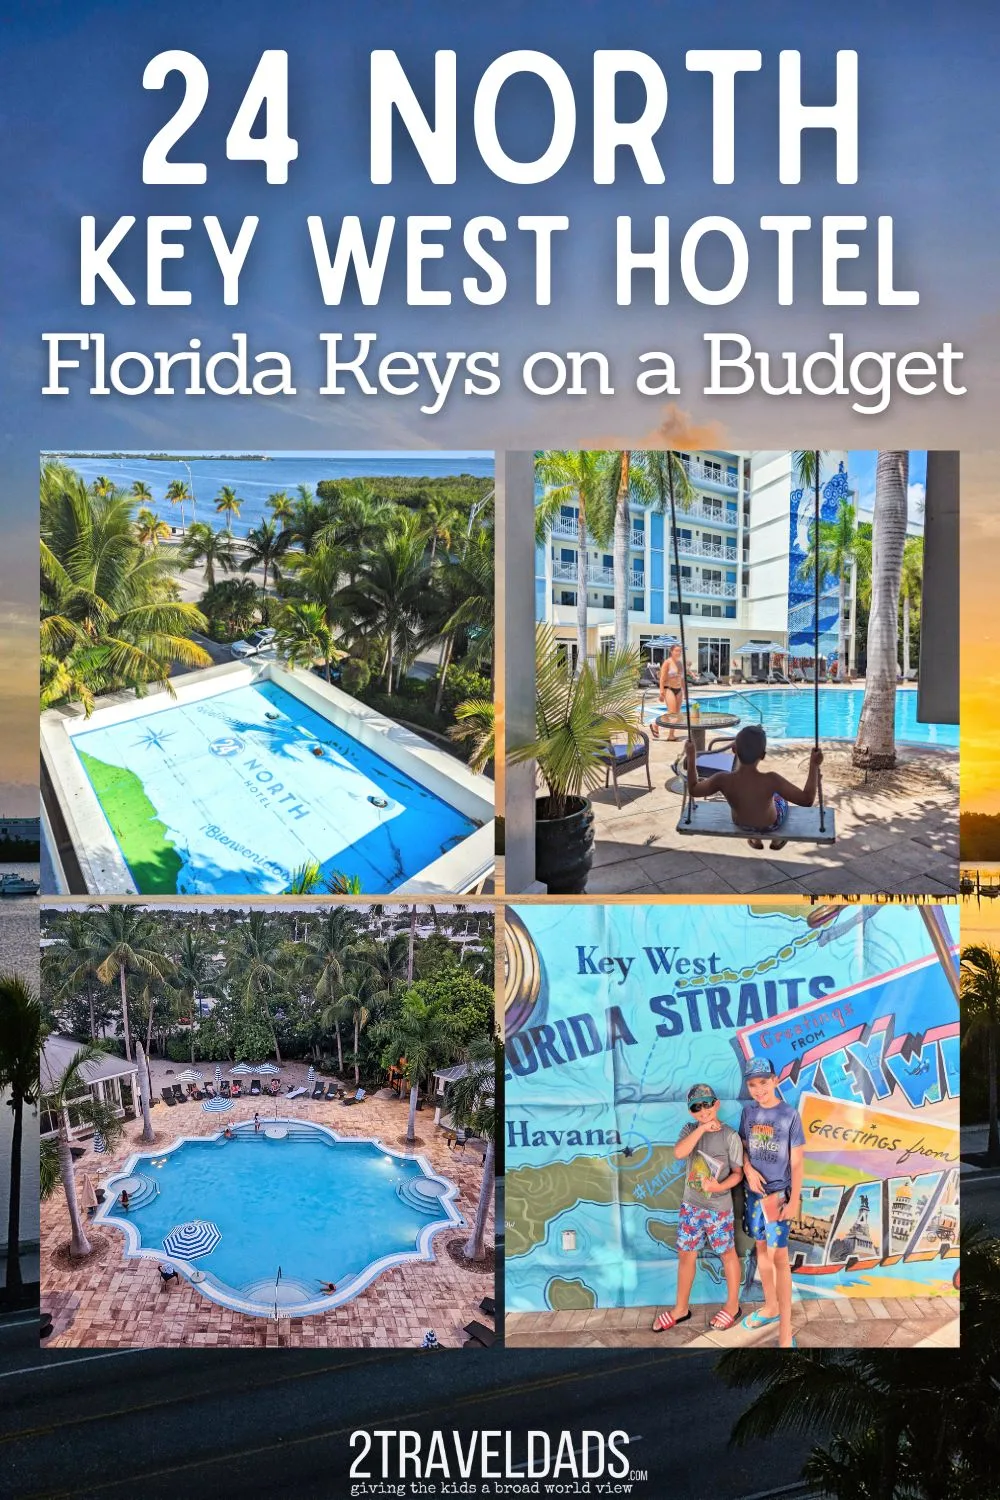 The 24 North Hotel in Key West is a surprising pick because of its location, but it's perfect for a budget family vacation. With a wonderful pool and recreation area, free shuttle to downtown Key West and affordable suite options, it's an ideal choice.